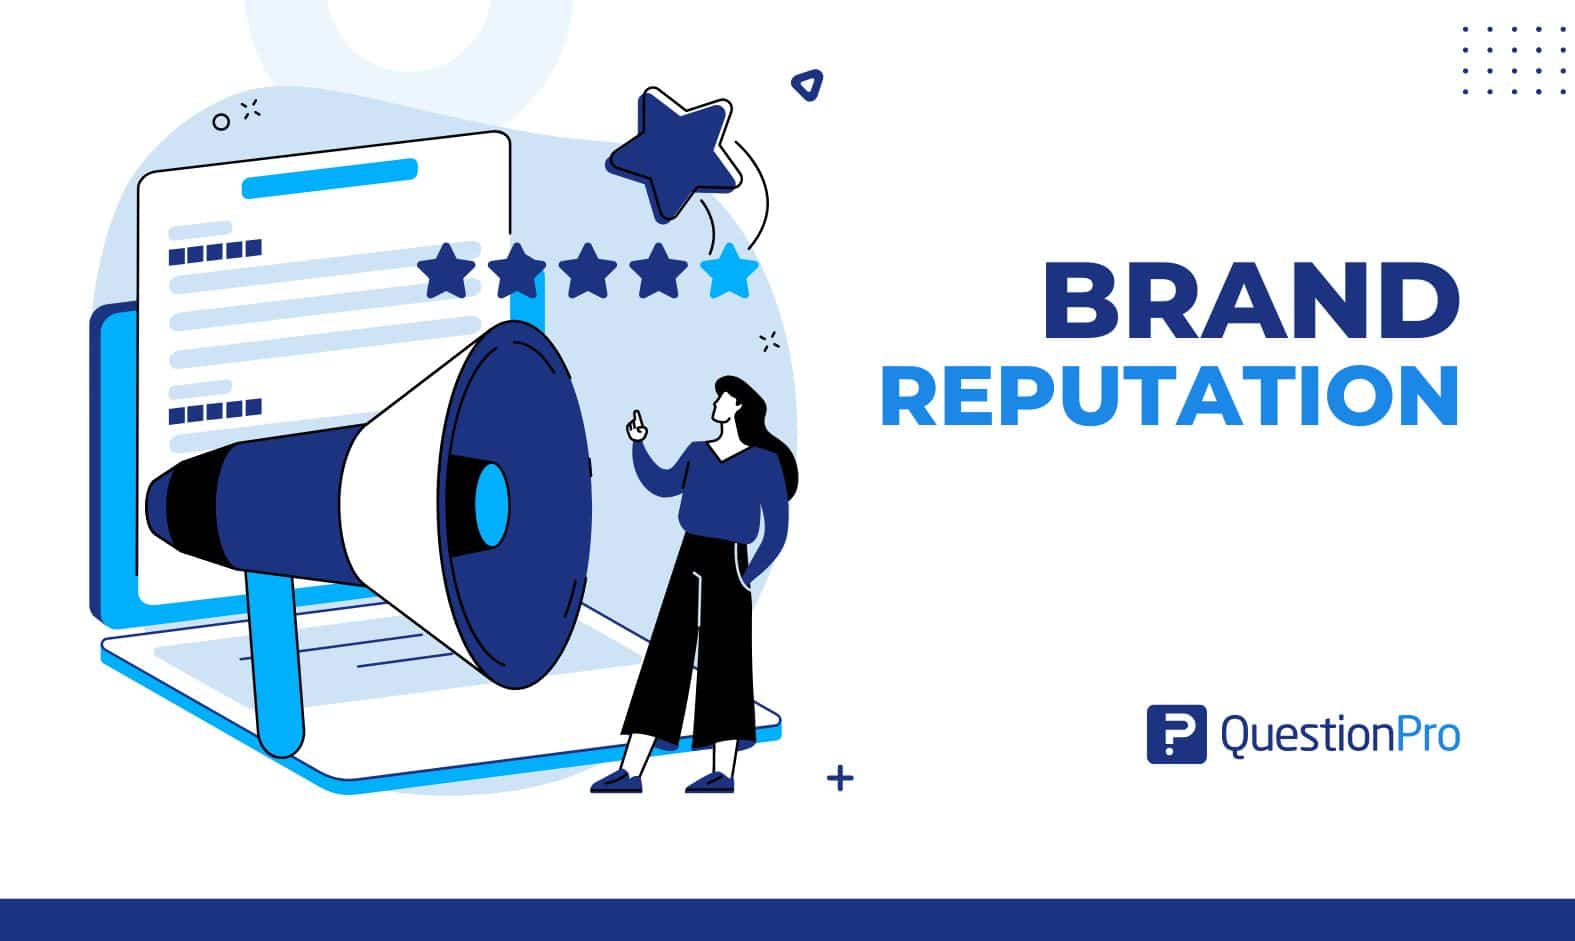 Brand Reputation What it is, Importance + How to Build It